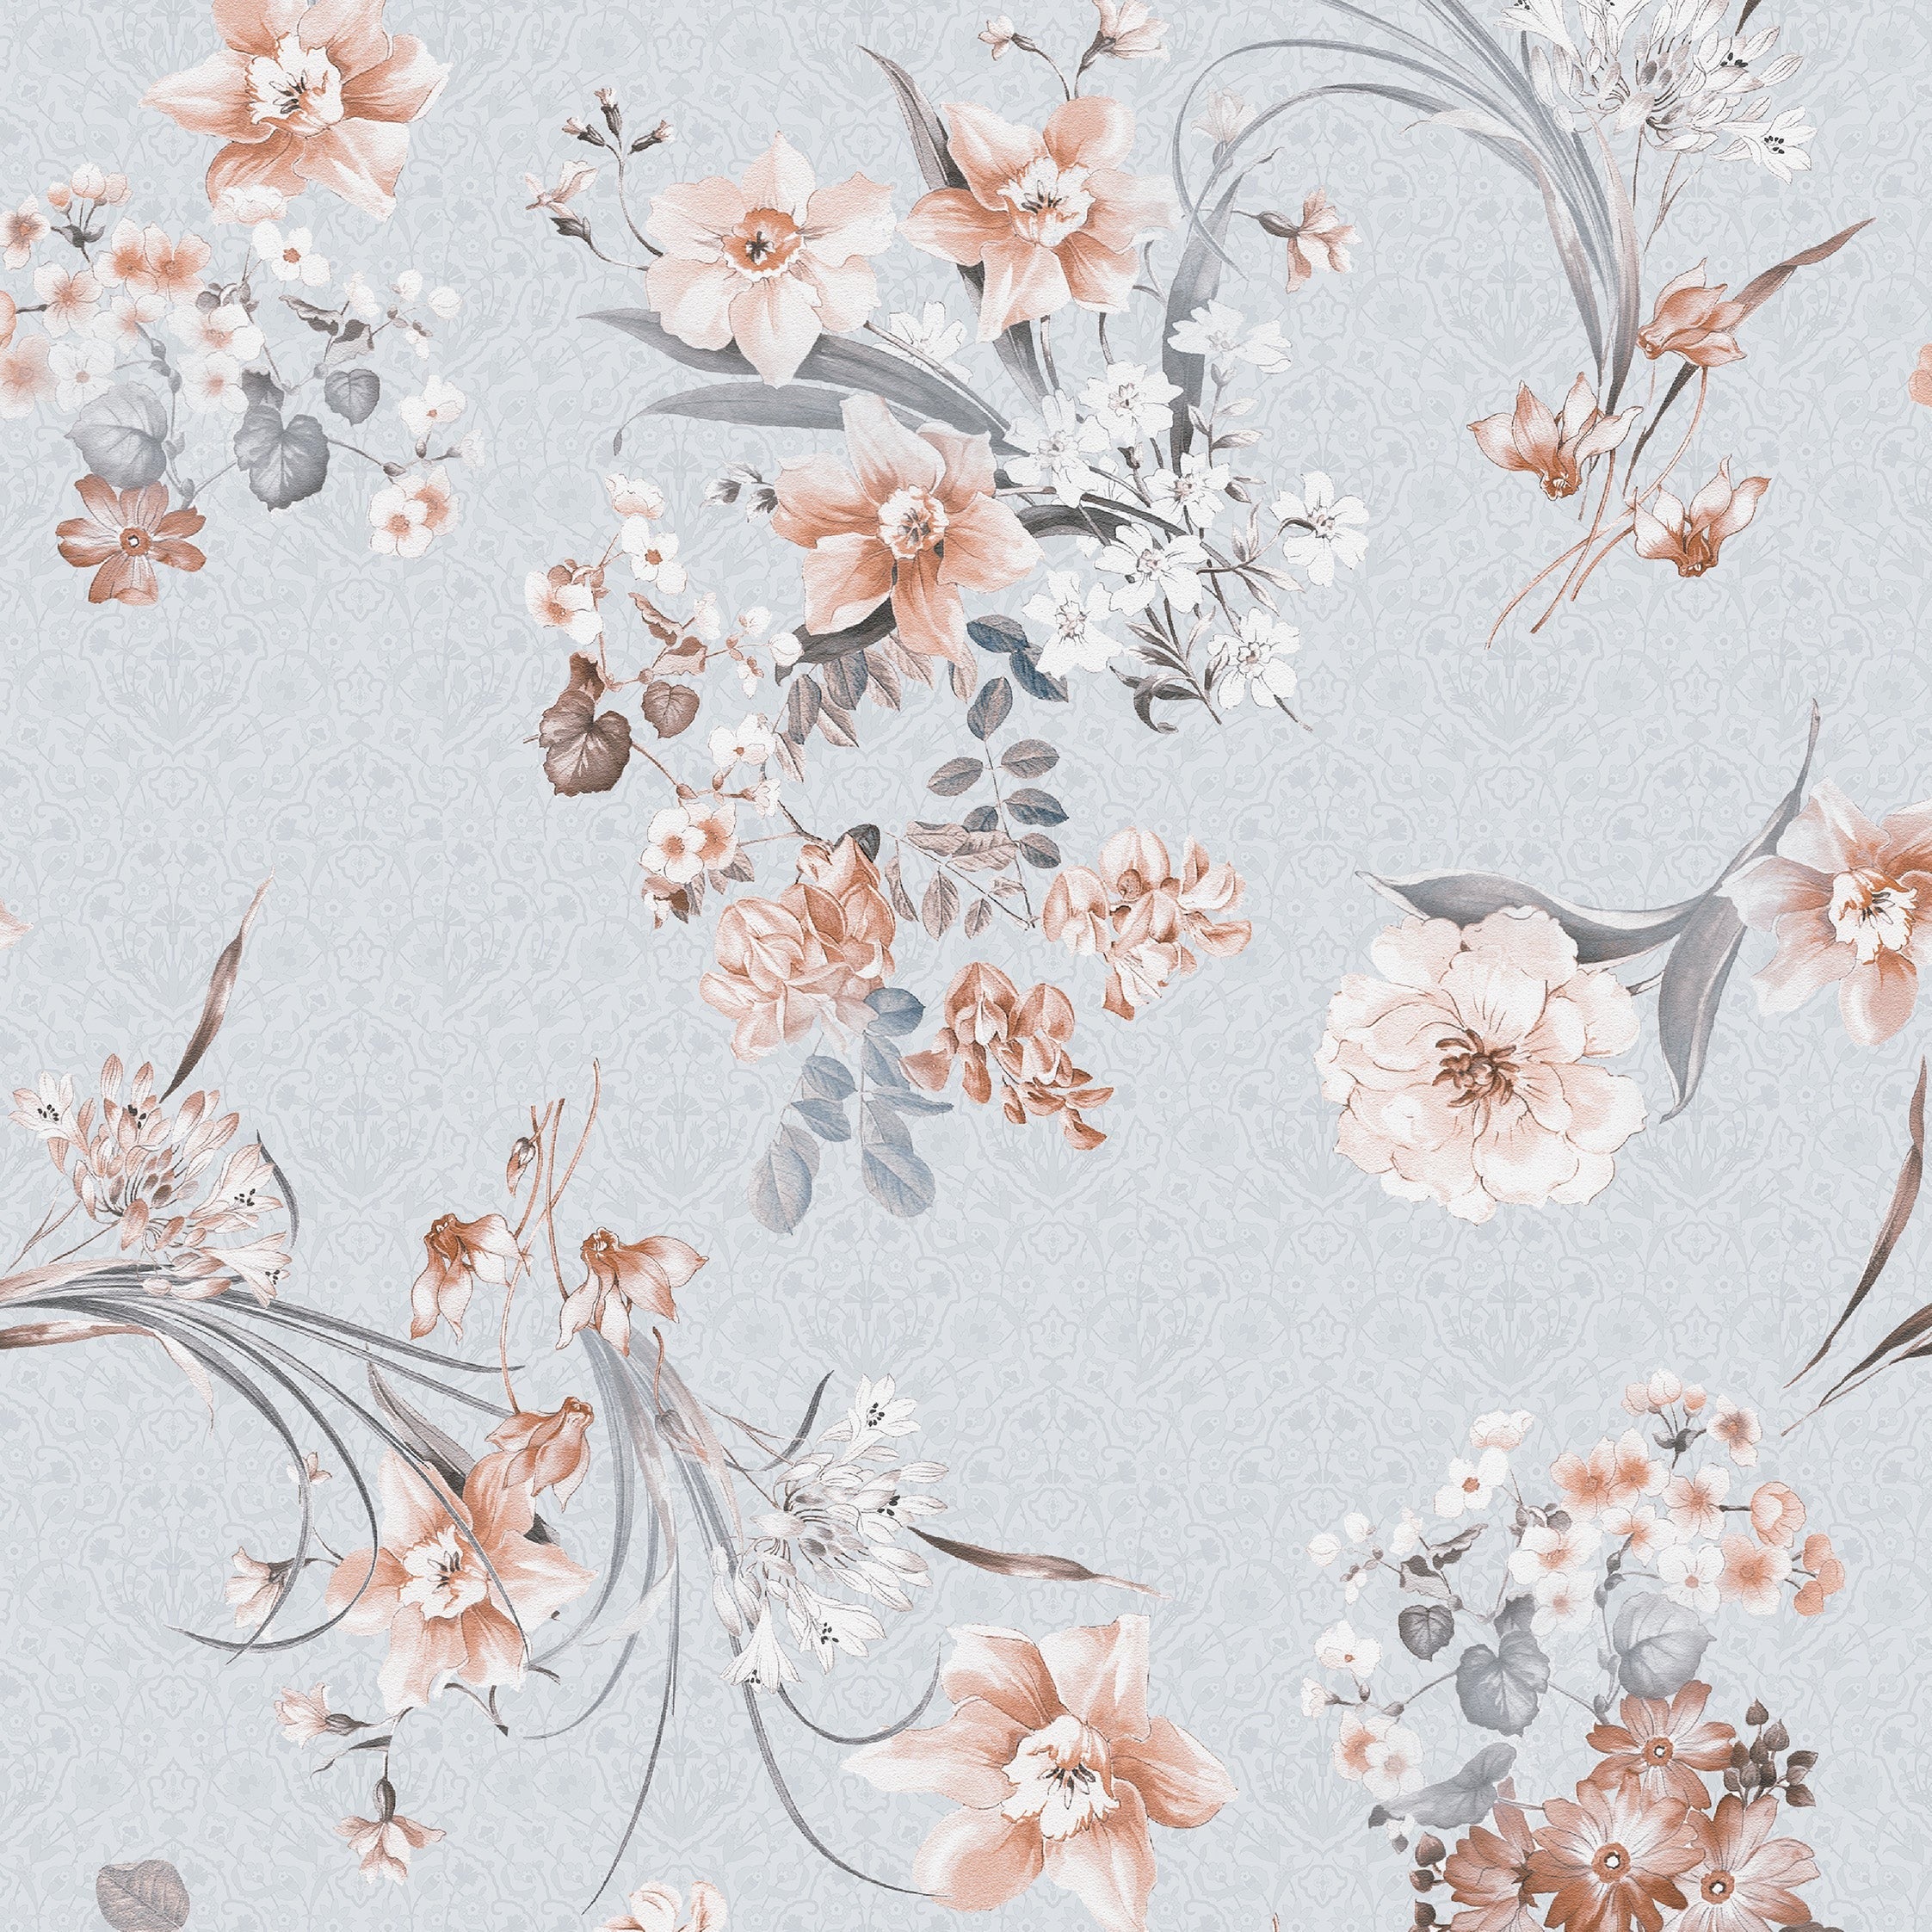 Close-up of the Boudoir Blooms Wallpaper, showcasing a detailed and romantic floral design. The wallpaper features clusters of soft peach flowers and gray foliage on a pale gray background, offering a subtle and elegant aesthetic suitable for sophisticated interiors.